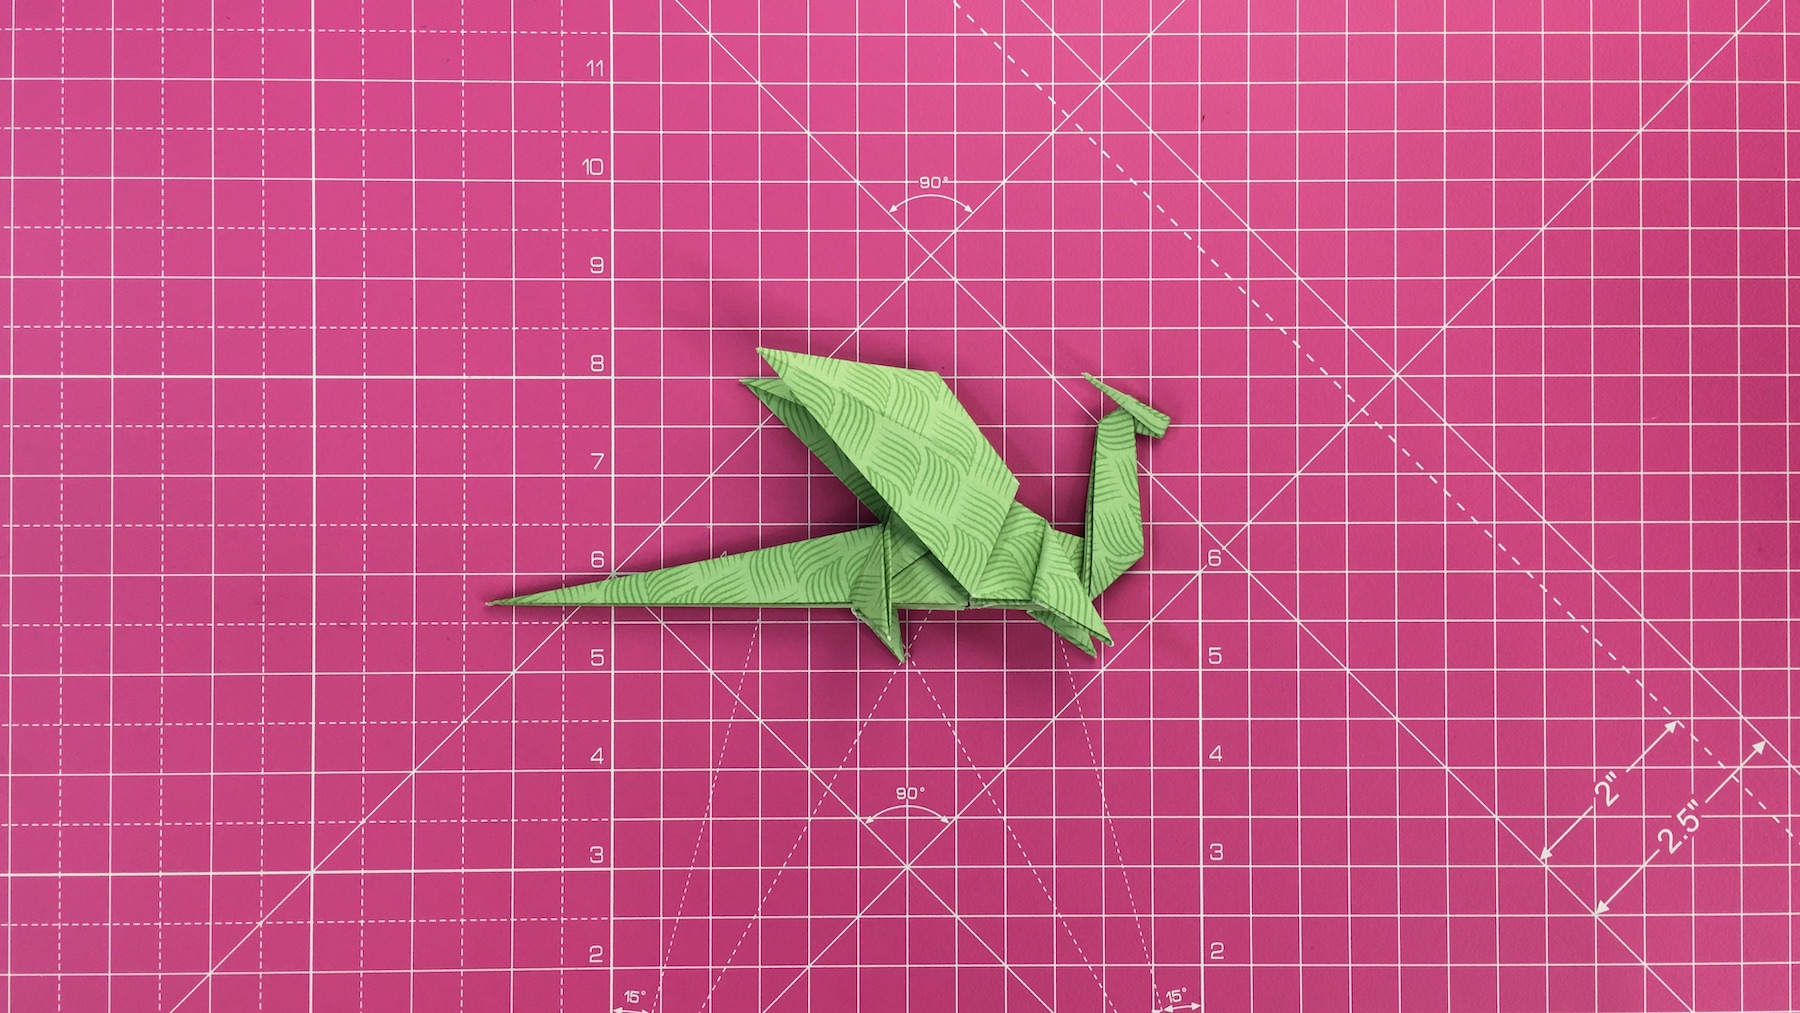 How to make an origami dragon, origami dragon tutorial - step 50